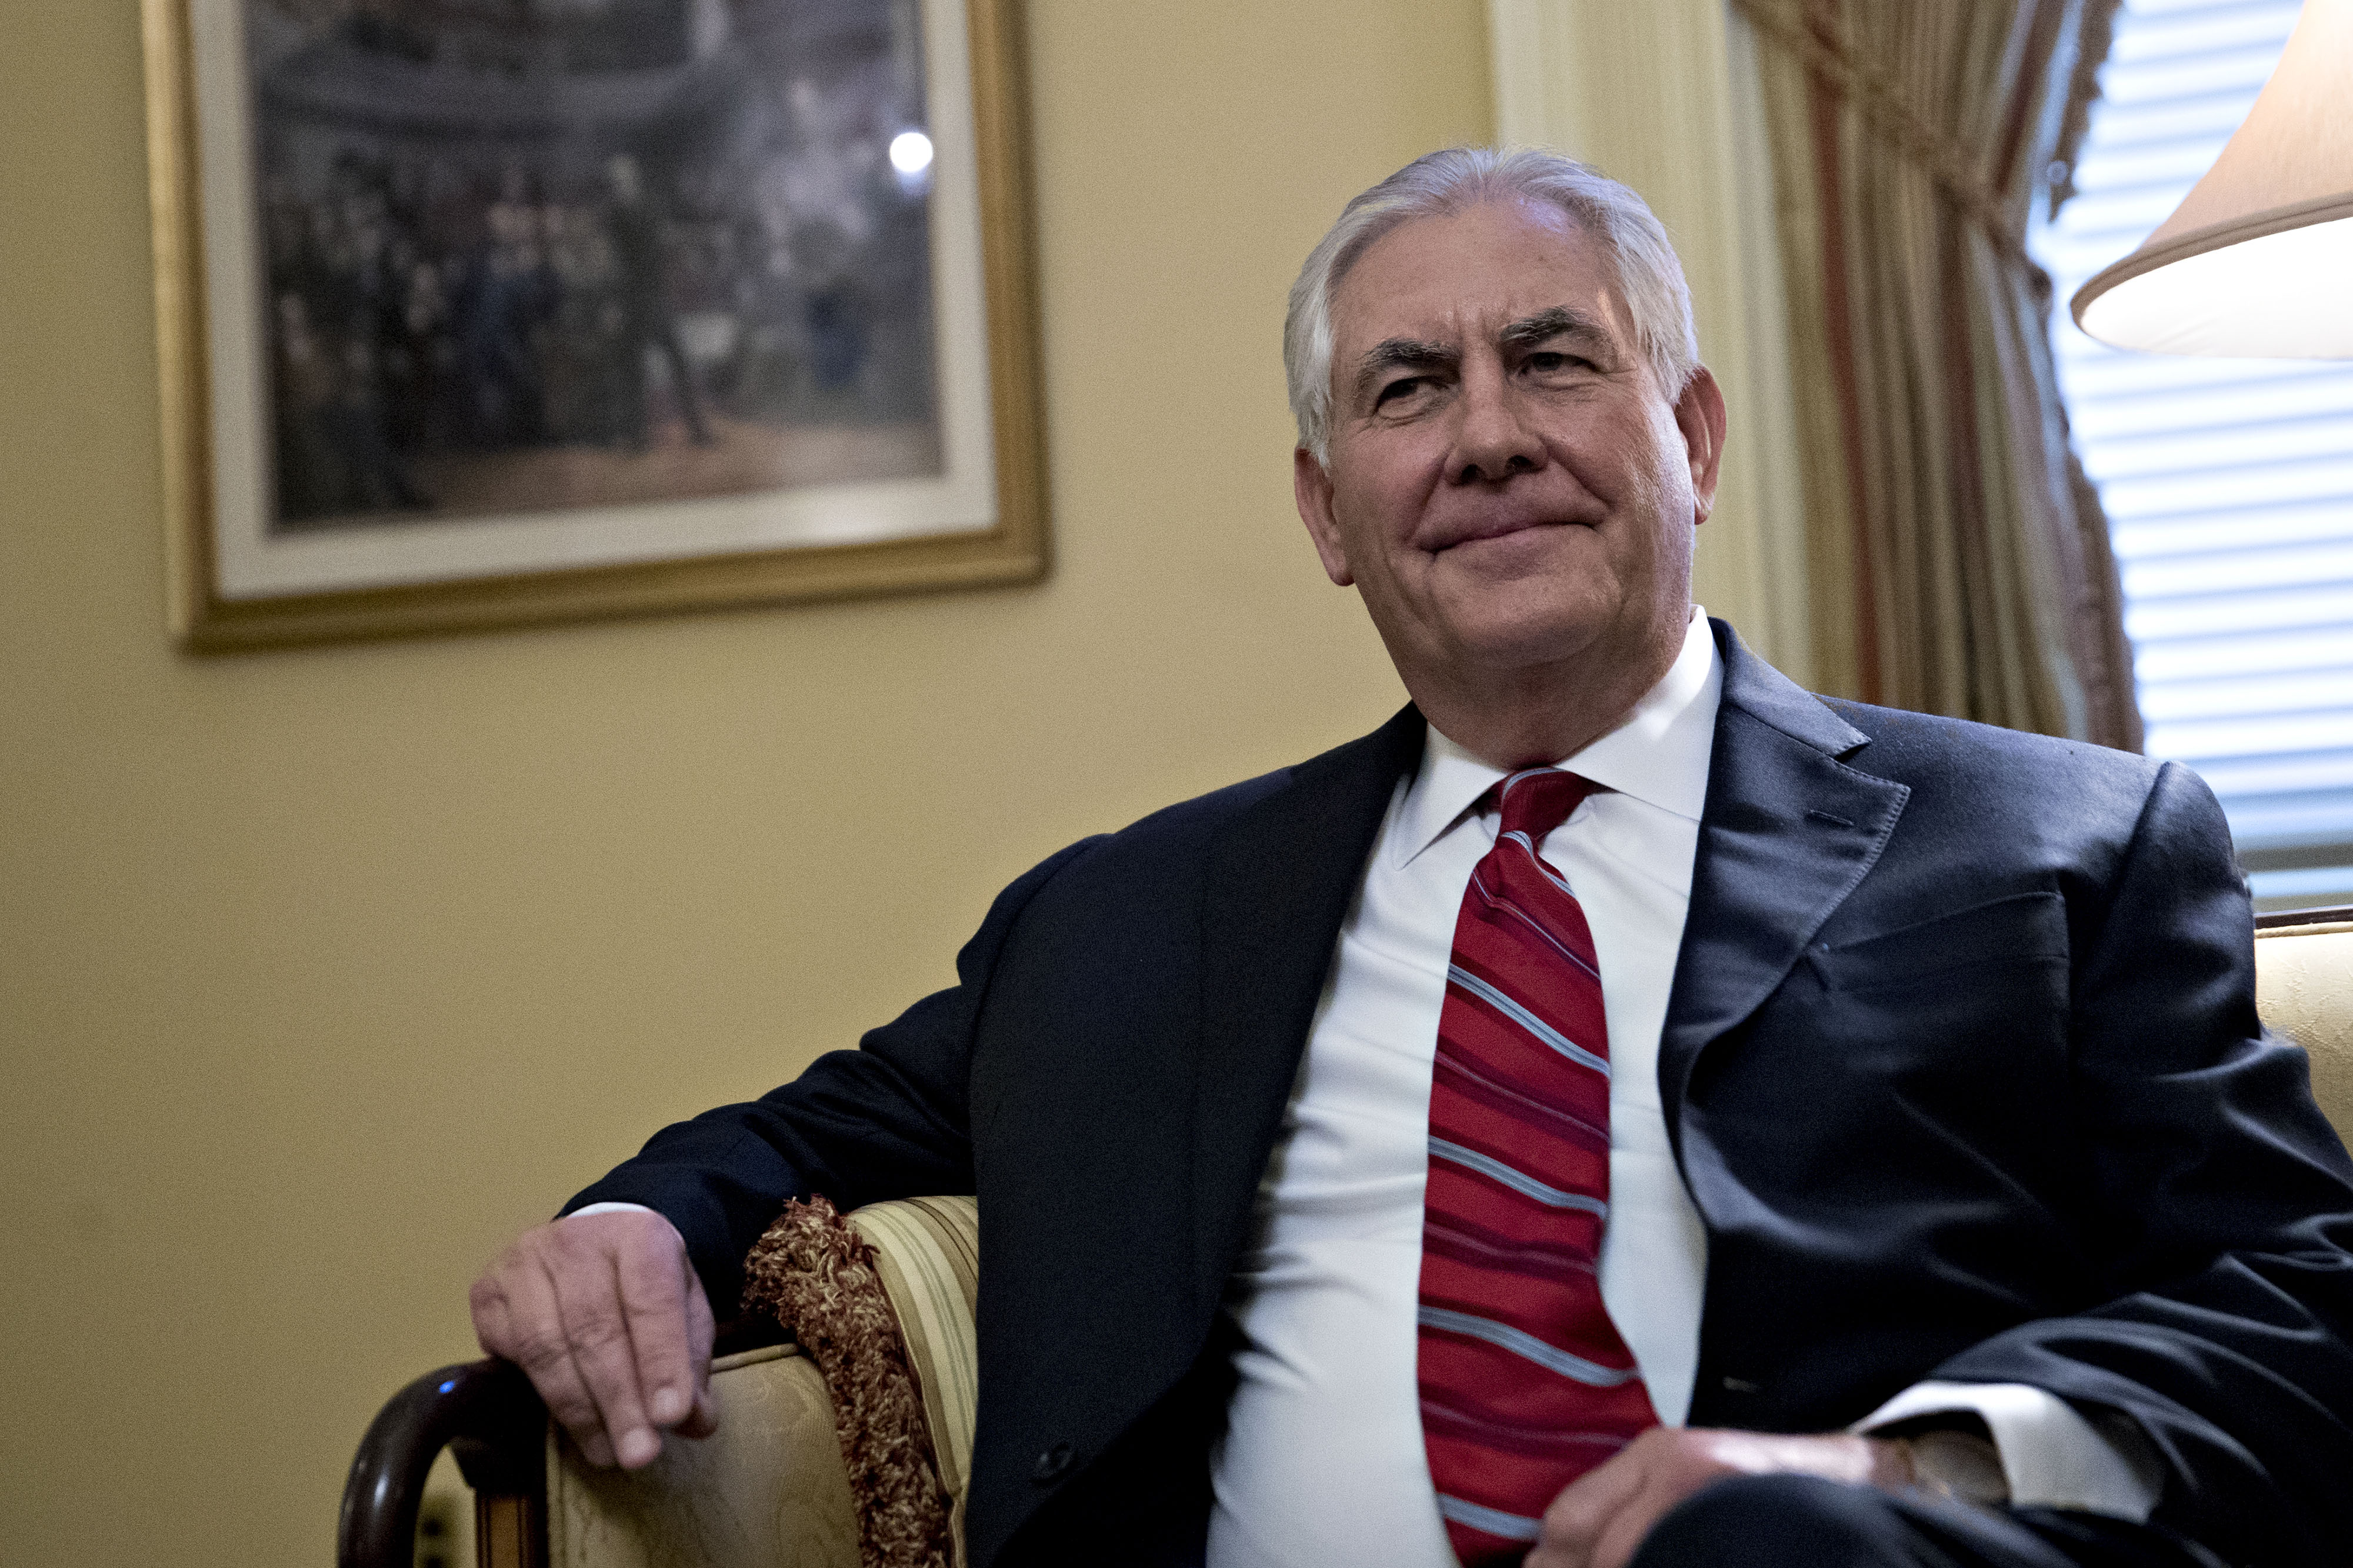 Rex Tillerson, former chief executive officer of Exxon Mobile Corp. and U.S. secretary of state nominee for president-elect Donald Trump, sits during a meeting with Senate Majority Leader Mitch McConnell, a Republican from Kentucky, not pictured, on Capitol Hill in Washington, D.C., U.S., on Wednesday, Jan. 4, 2017. (Andrew Harrer&mdash;Bloomberg/Getty Images)